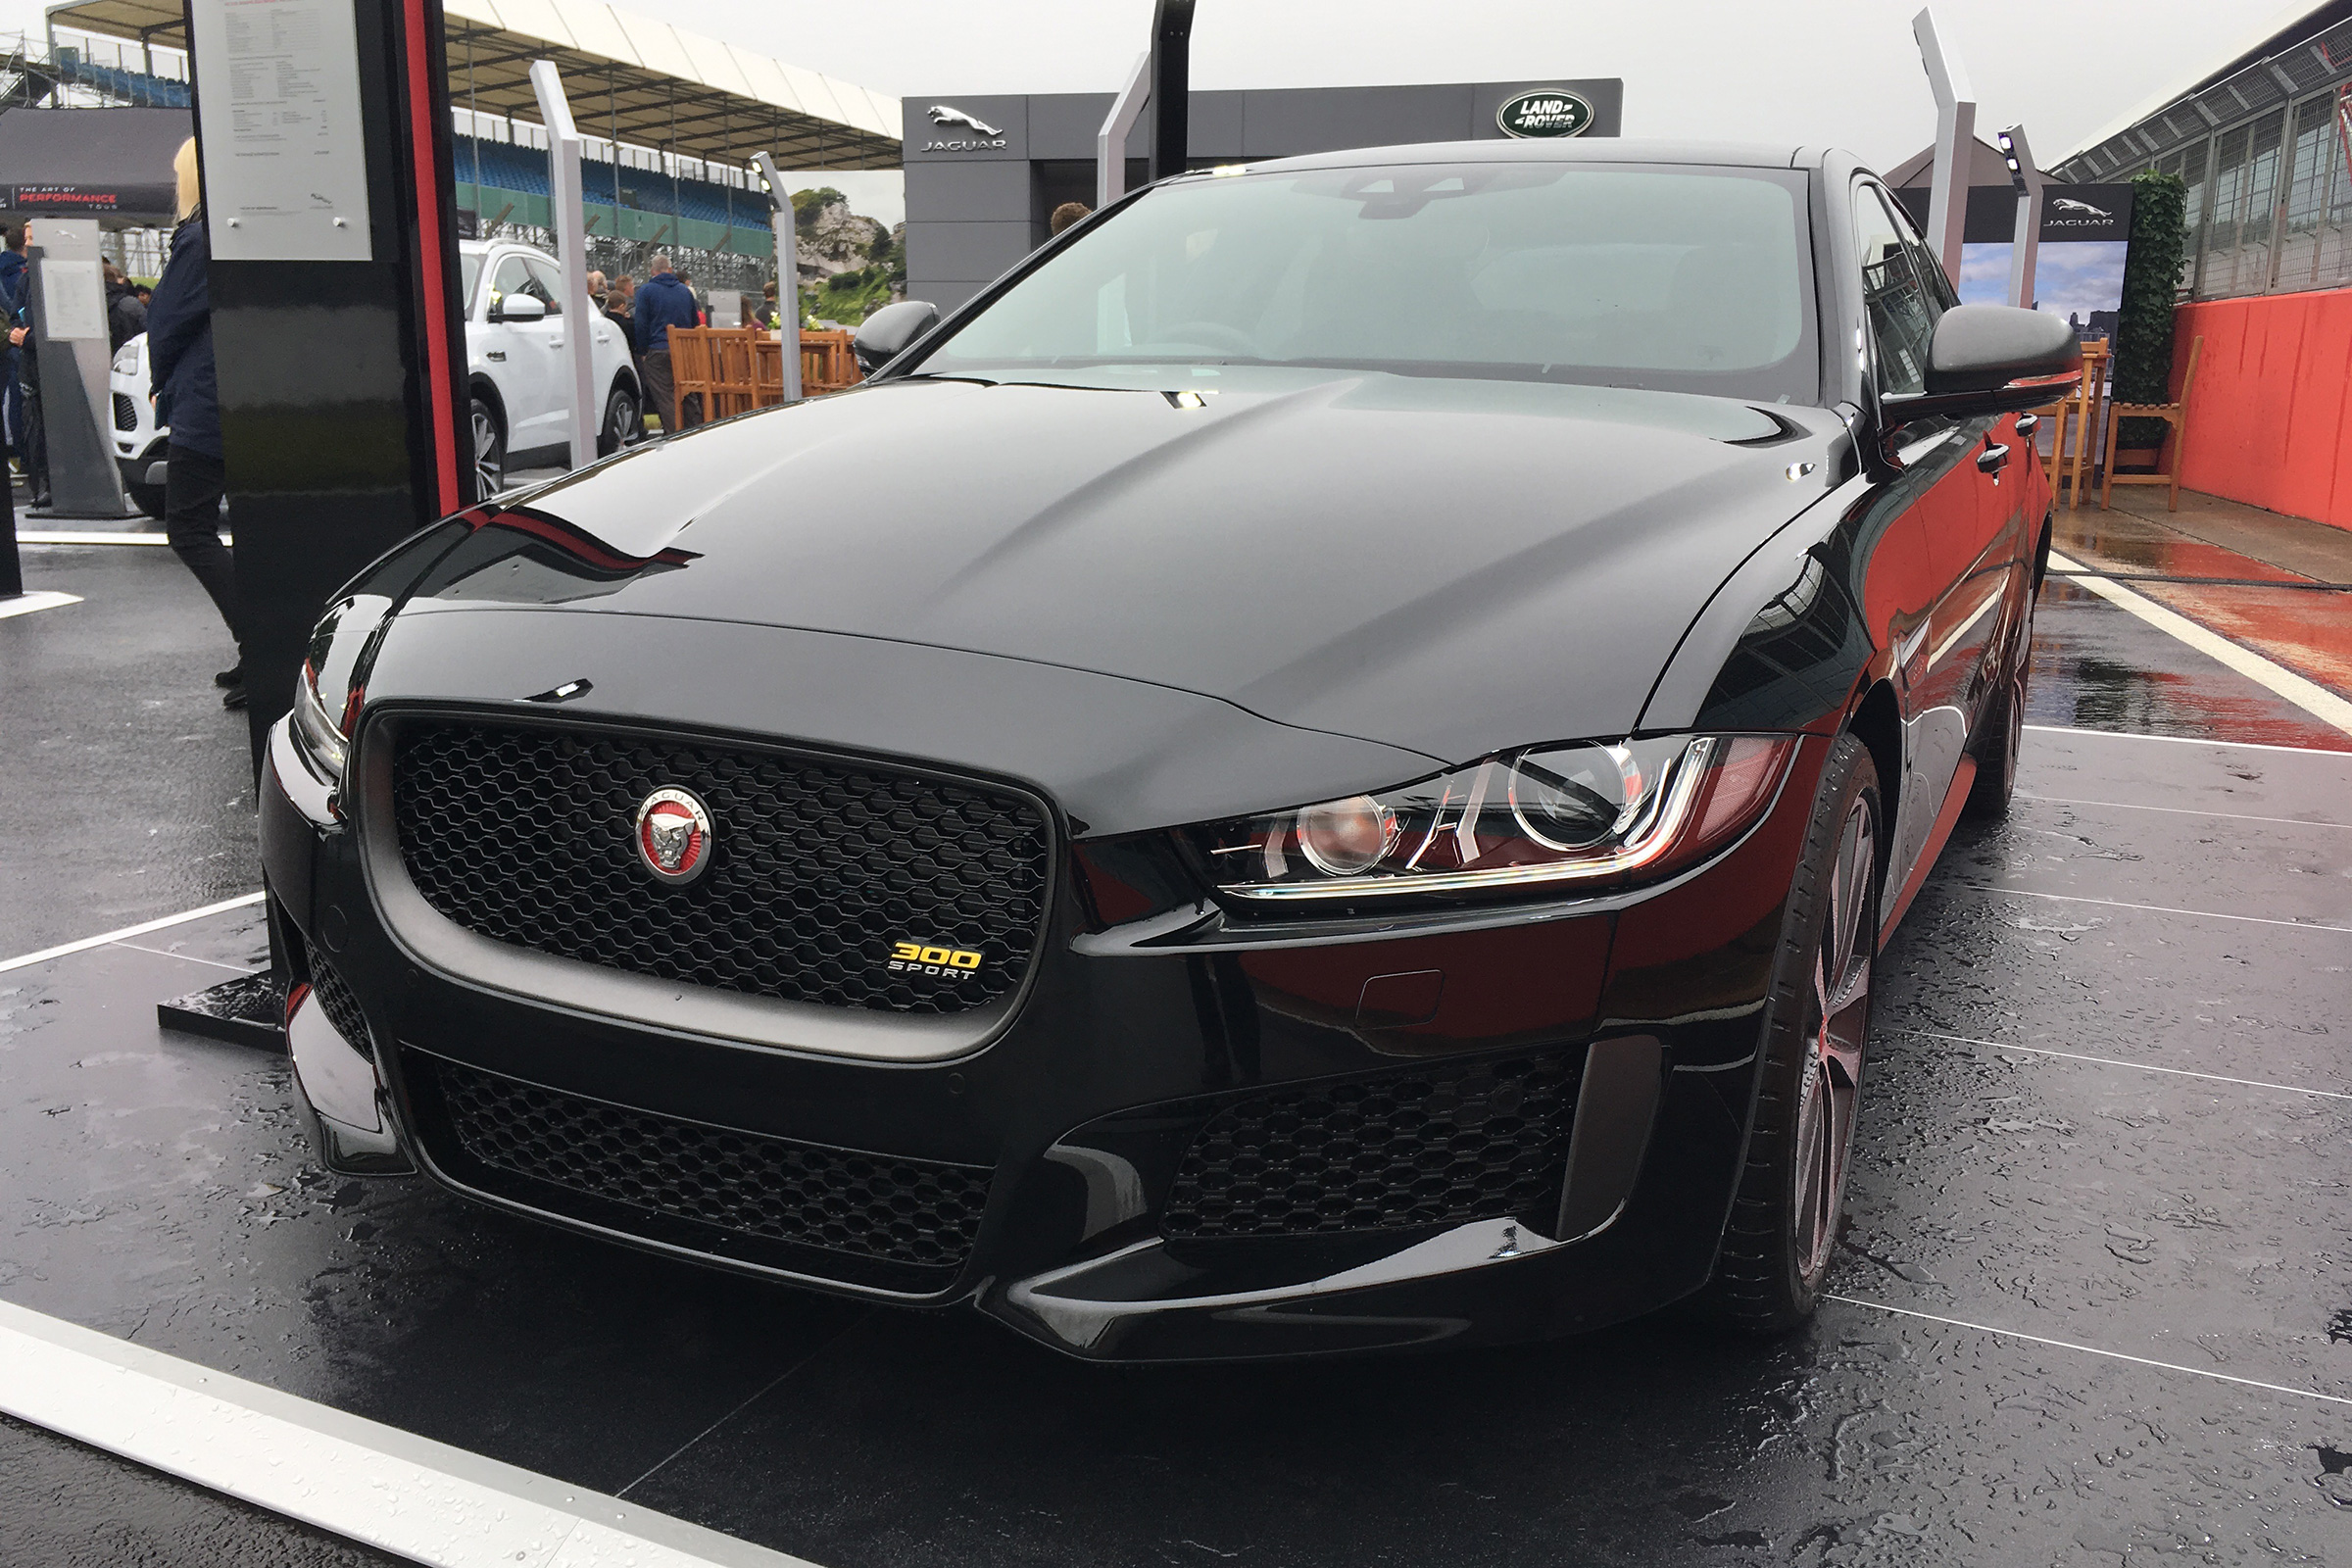 New Jaguar XE 300 Sport seen in the metal for first time Auto Express